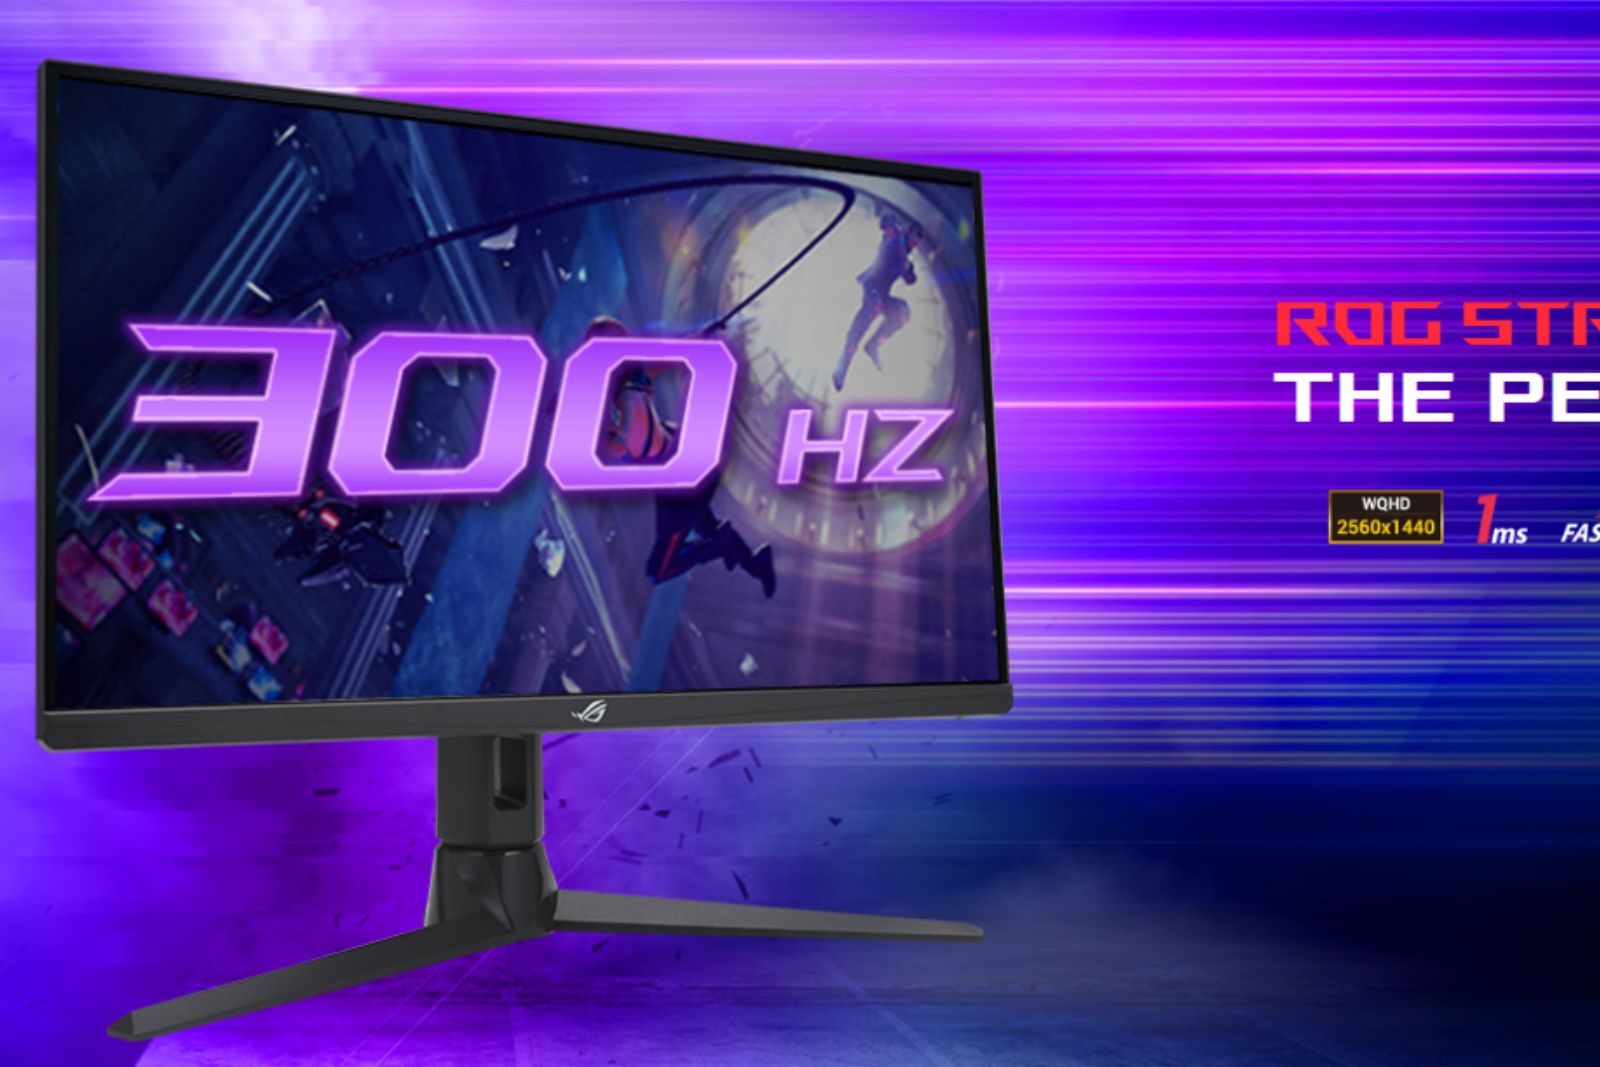 Asus introduces new ROG Strix Gaming Monitor with 300Hz Refresh Rate